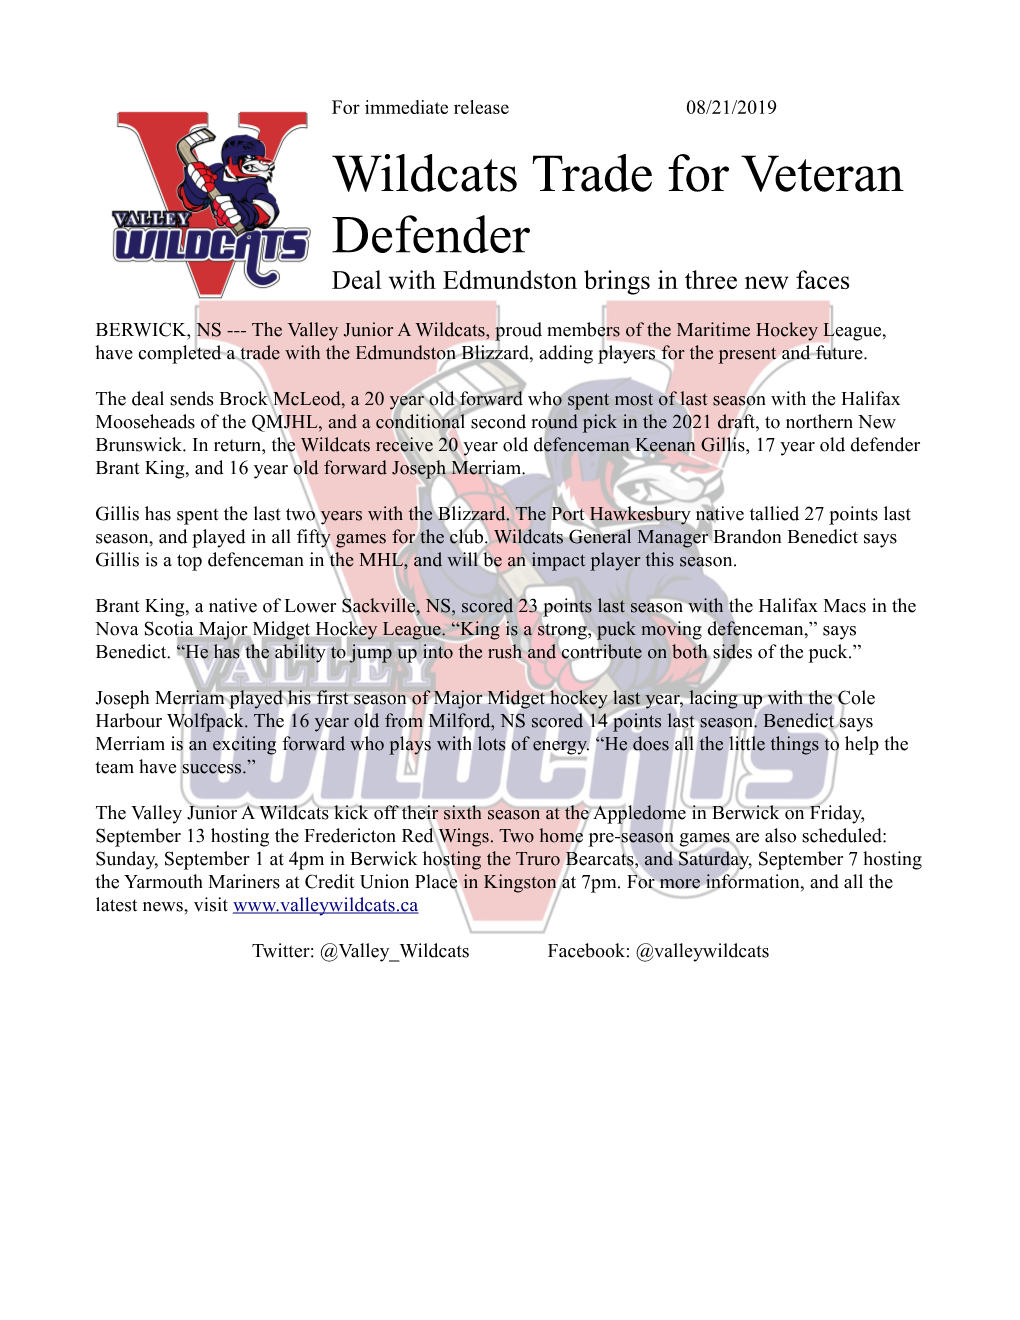 Wildcats Trade for Veteran Defender Deal with Edmundston Brings in Three New Faces